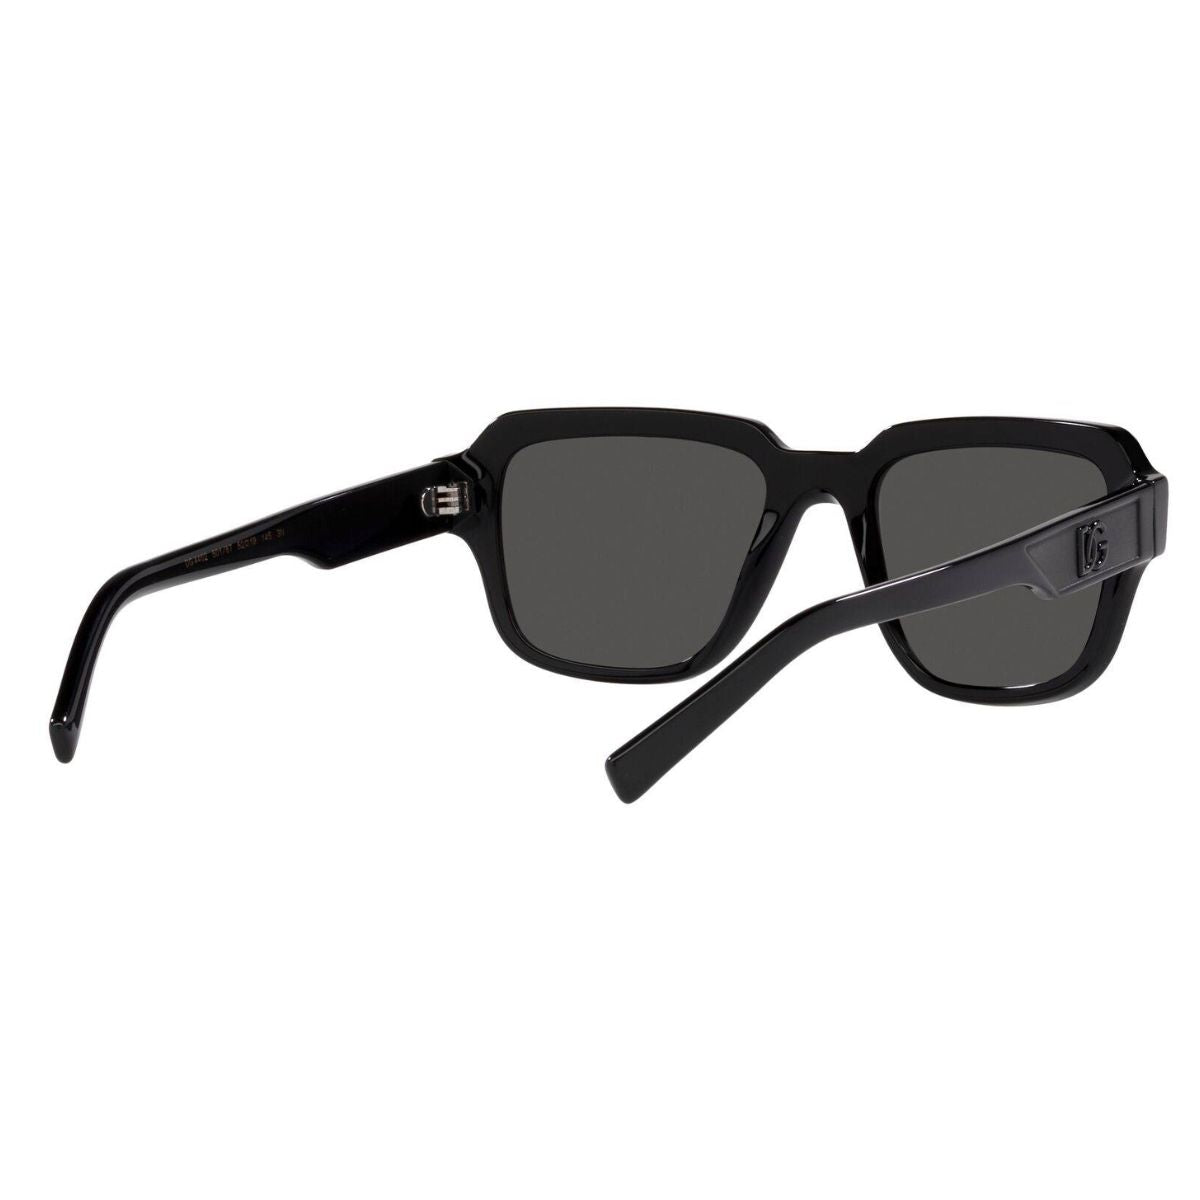 "Discover the sleek black and grey square-shaped design of Dolce & Gabbana DG4402 501/87 sunglasses."